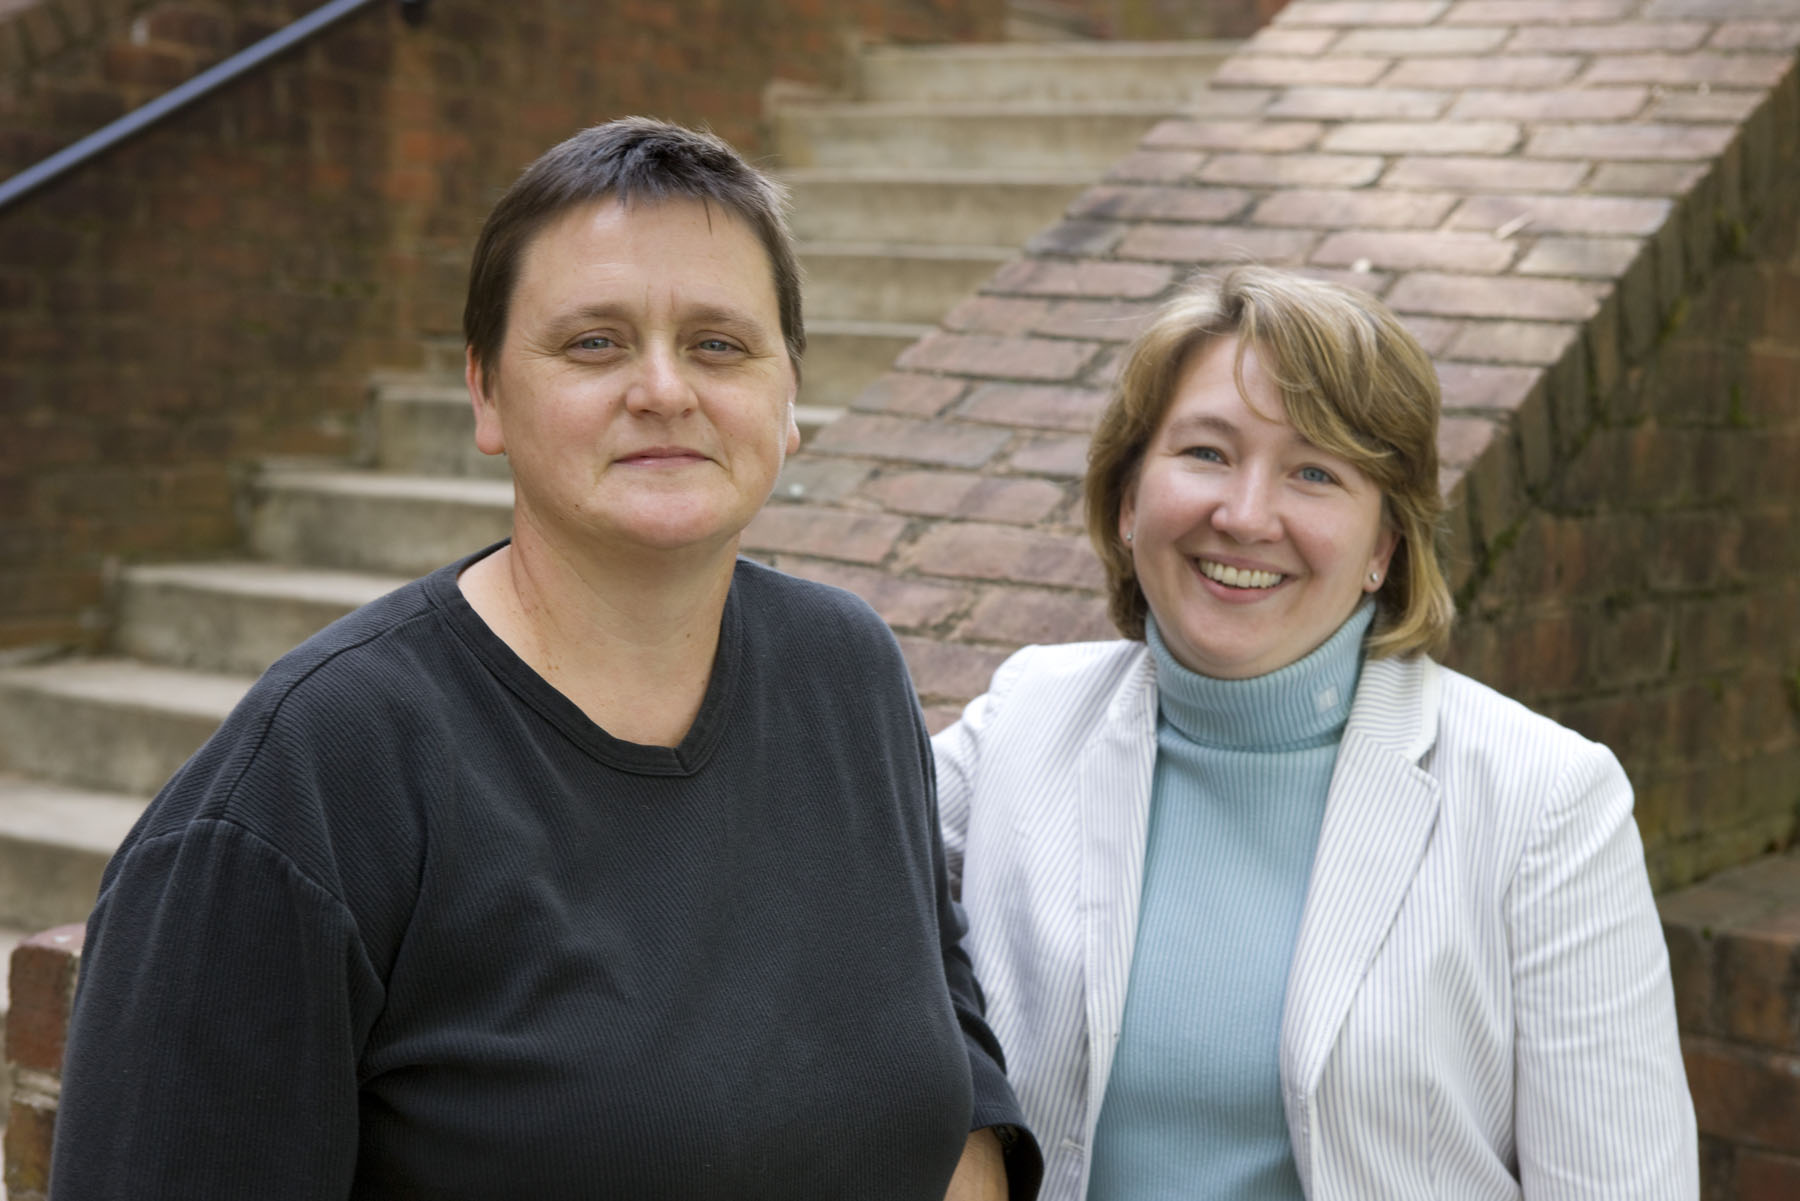 Tonya Moon (left) and Catherine Brighton (right) stand next to each other smiling at the camera 